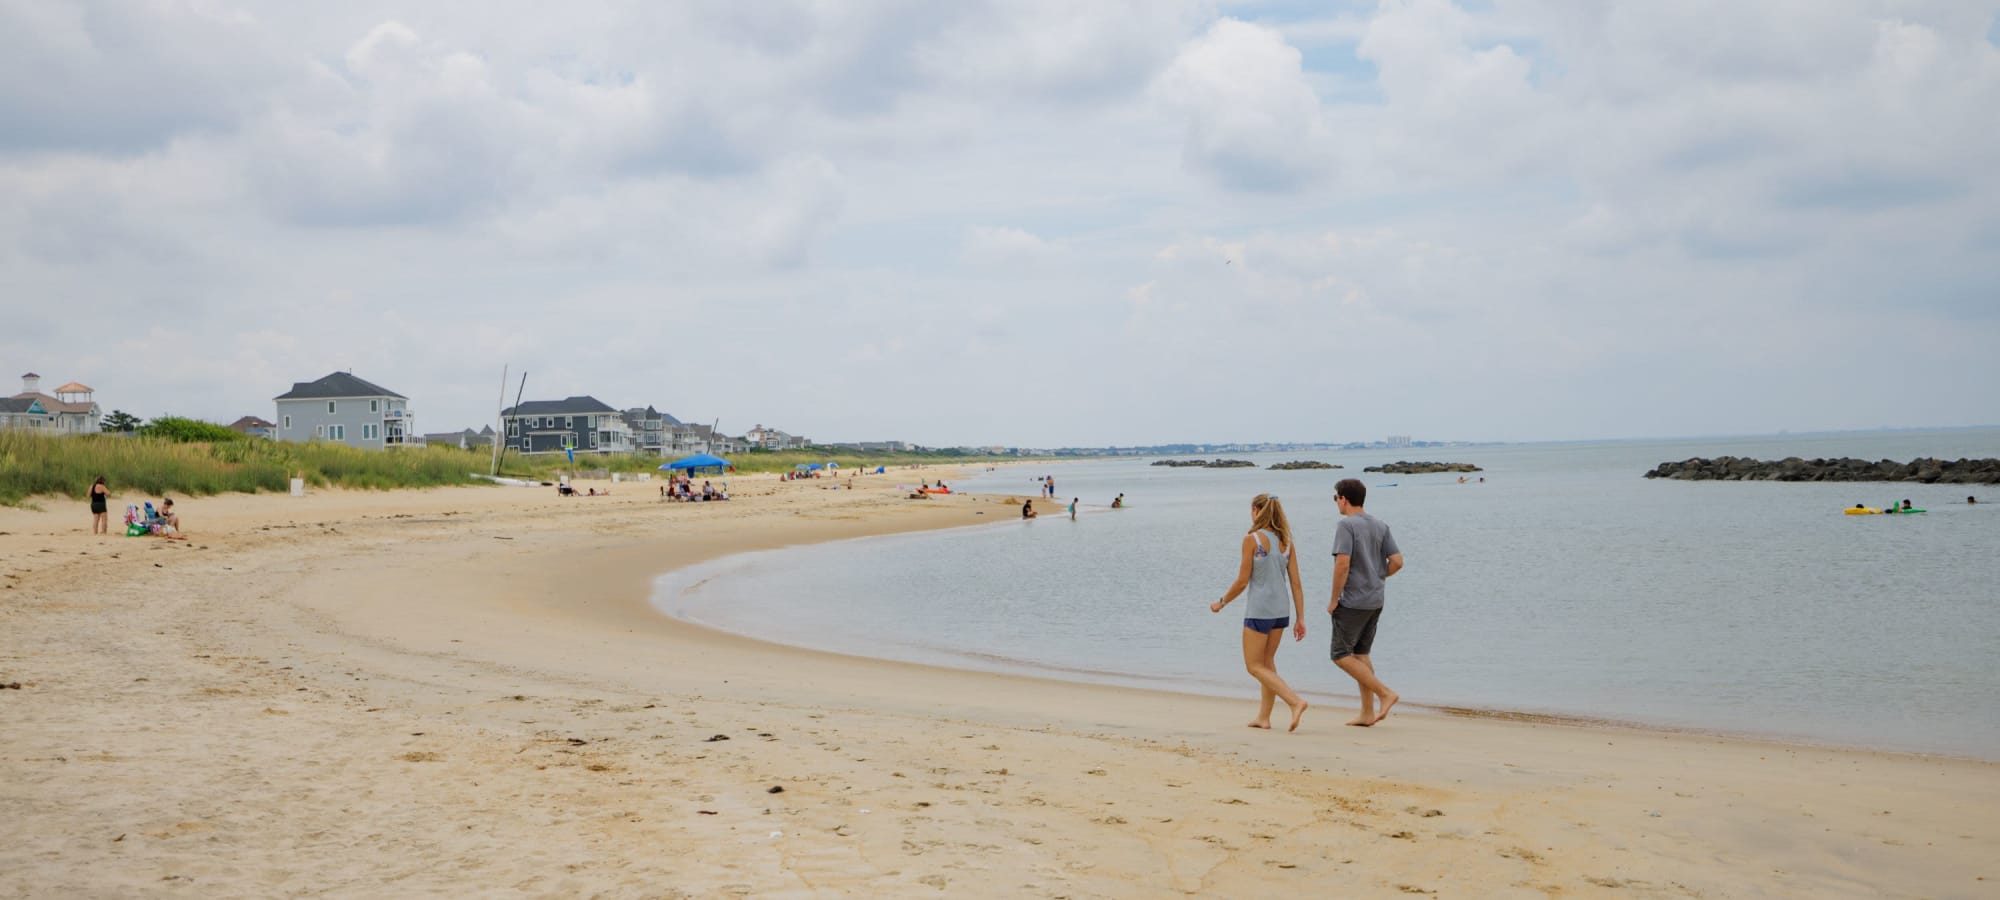 Residents walking on the beach near Village Square Apartments in Norfolk, Virginia